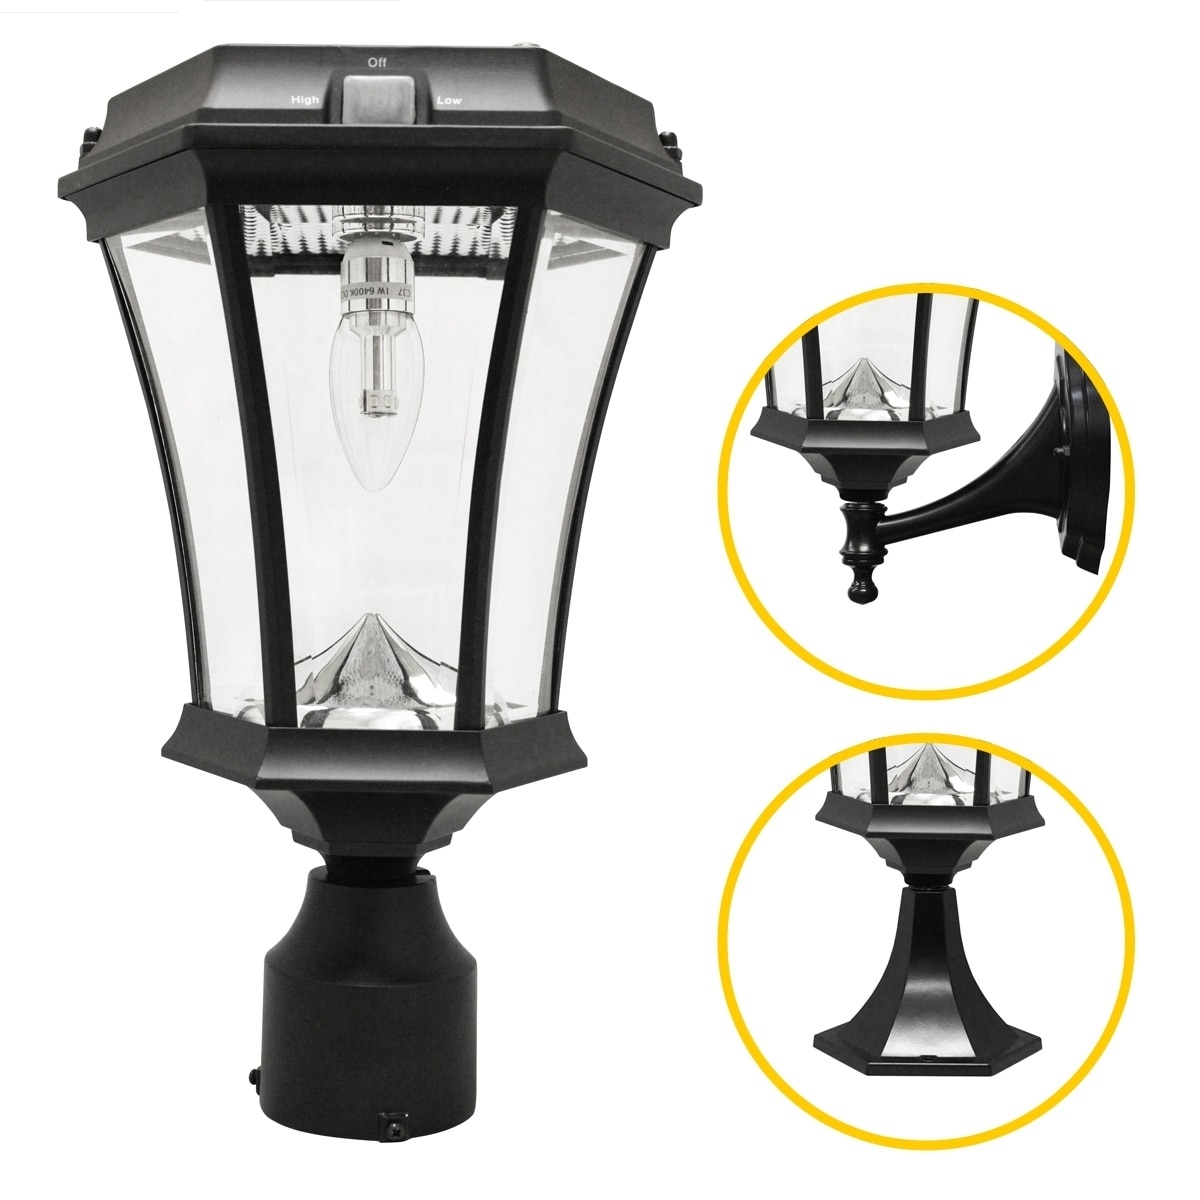 Gama Sonic Victorian Bulb Solar Light with GS Solar LED Light Bulb Wall/Pier/  Inch Fitter Mounts Black or White Finish Bed Bath  Beyond 27102226